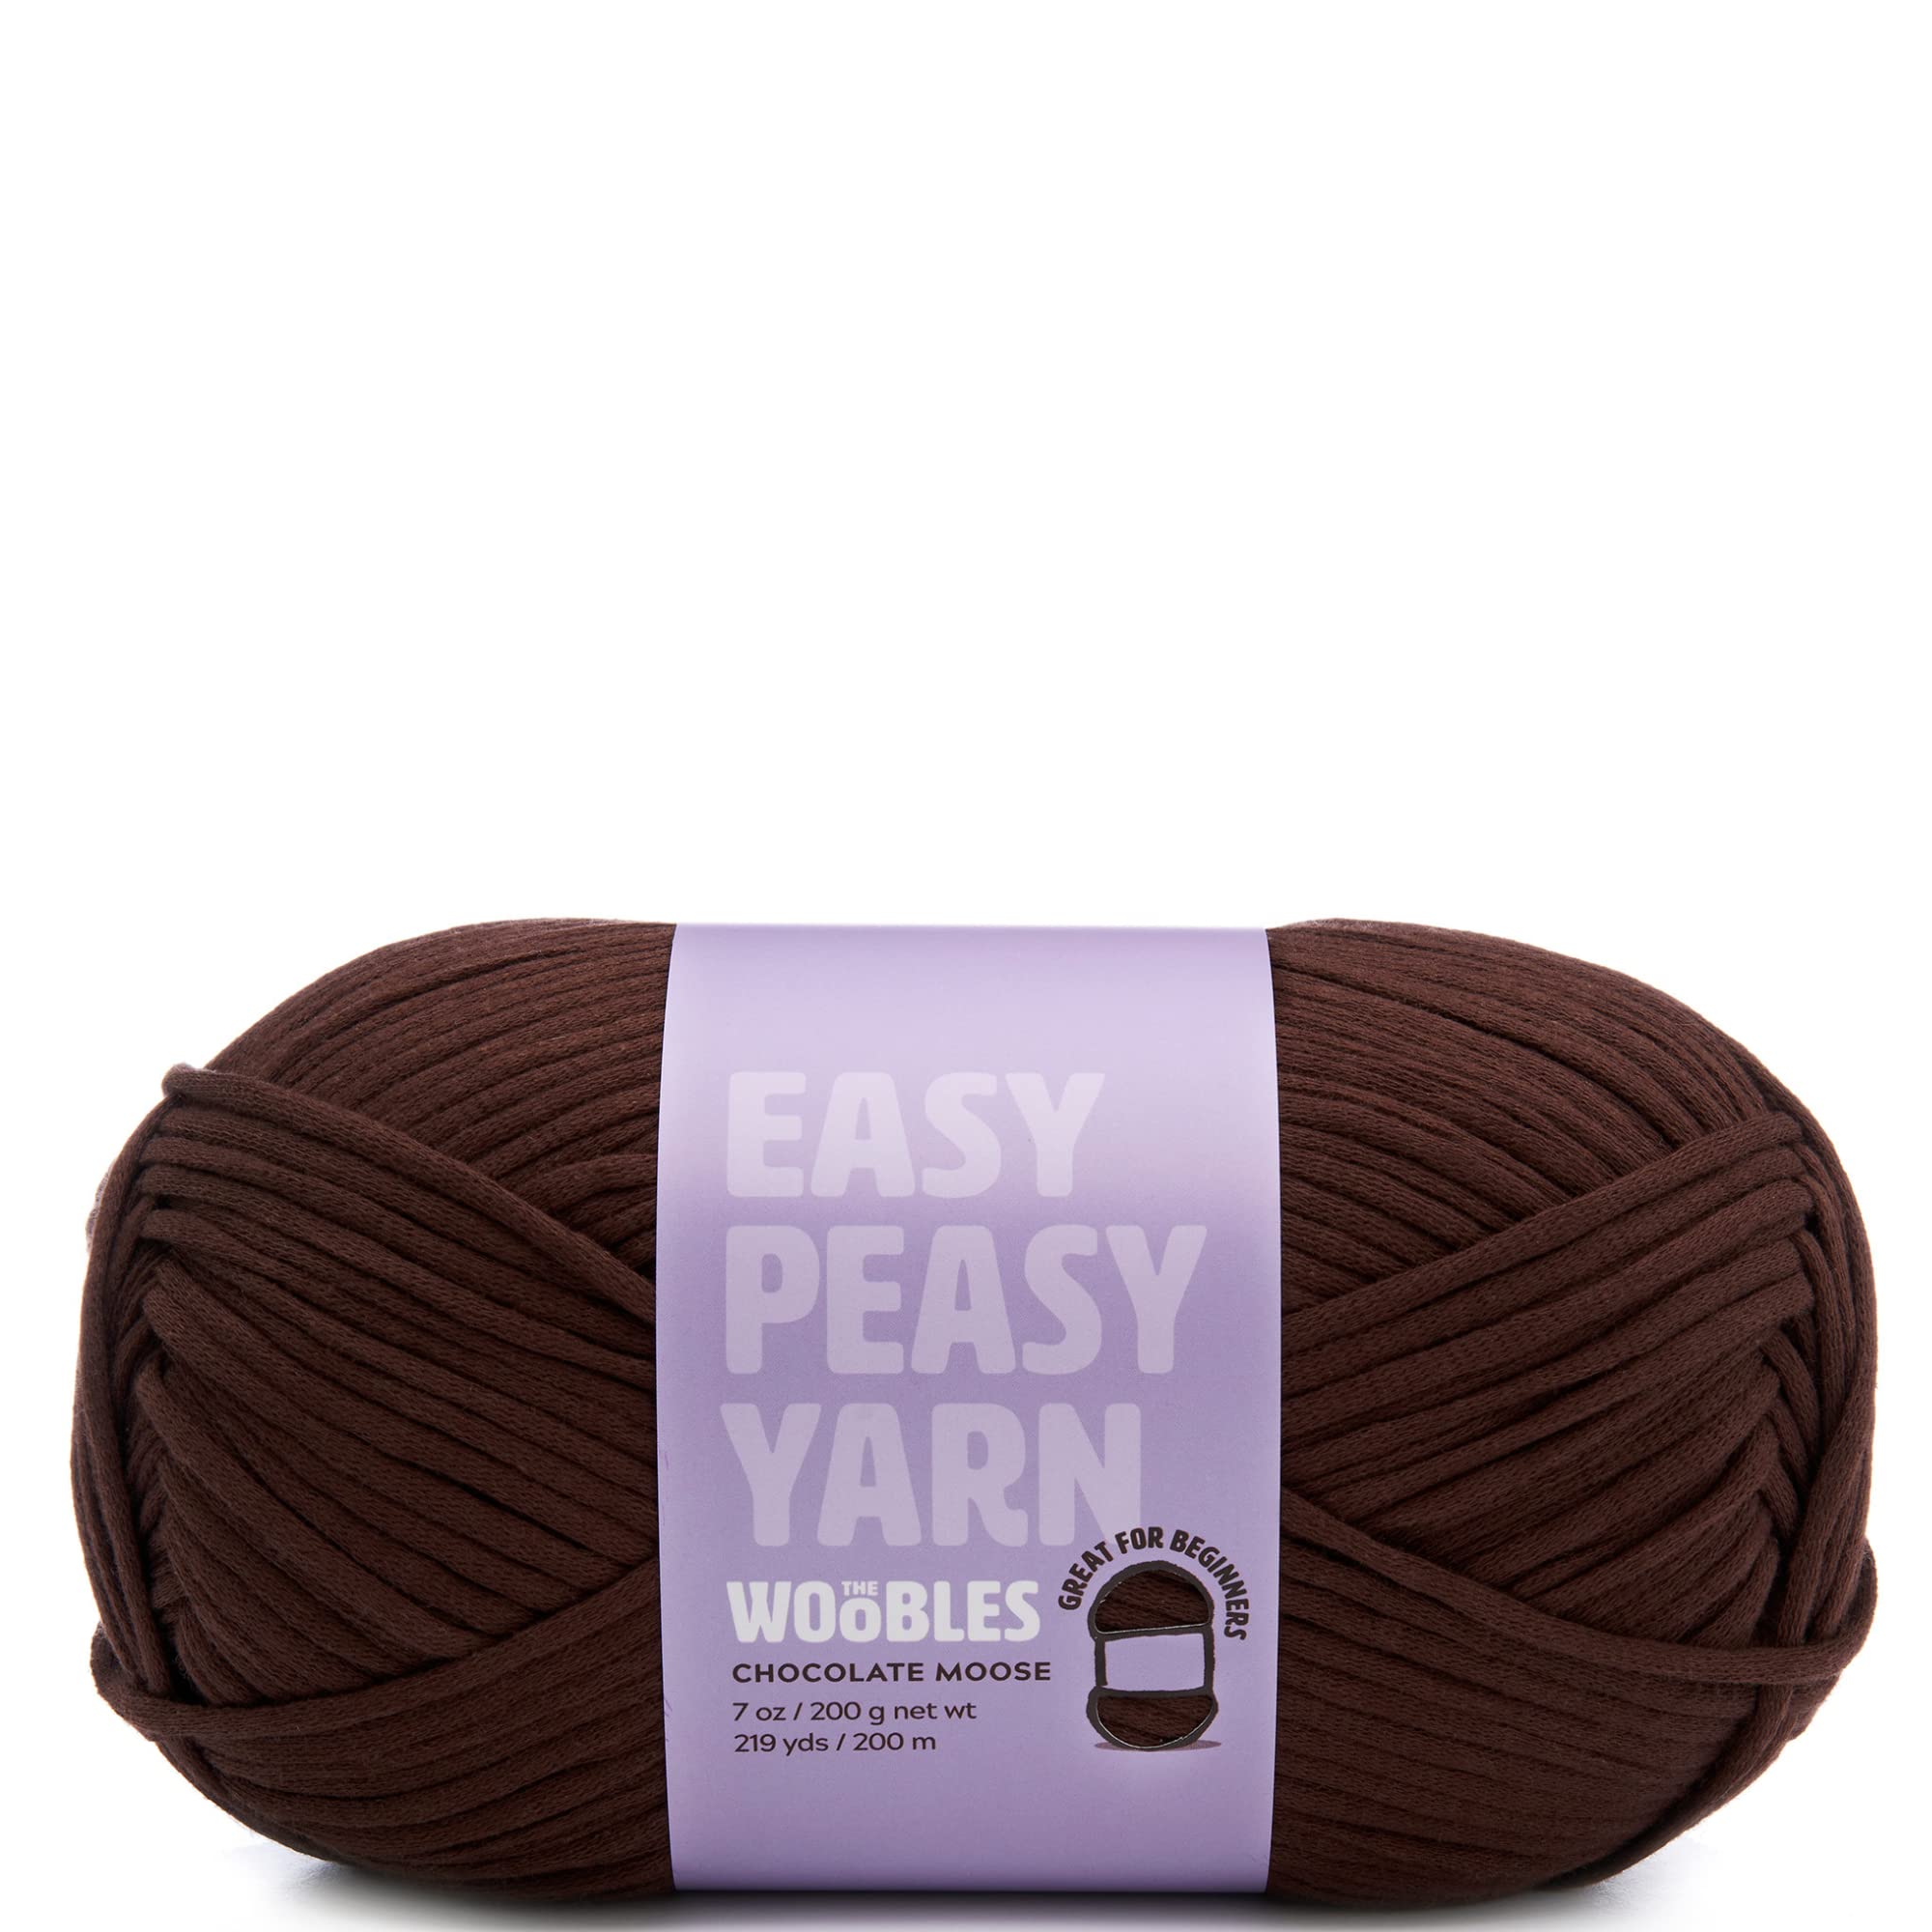 The Woobles Easy Peasy Yarn, Crochet Knitting Yarn For Beginners With  Easy-To-See Stitches - Yarn For Crocheting - Worsted Mediu